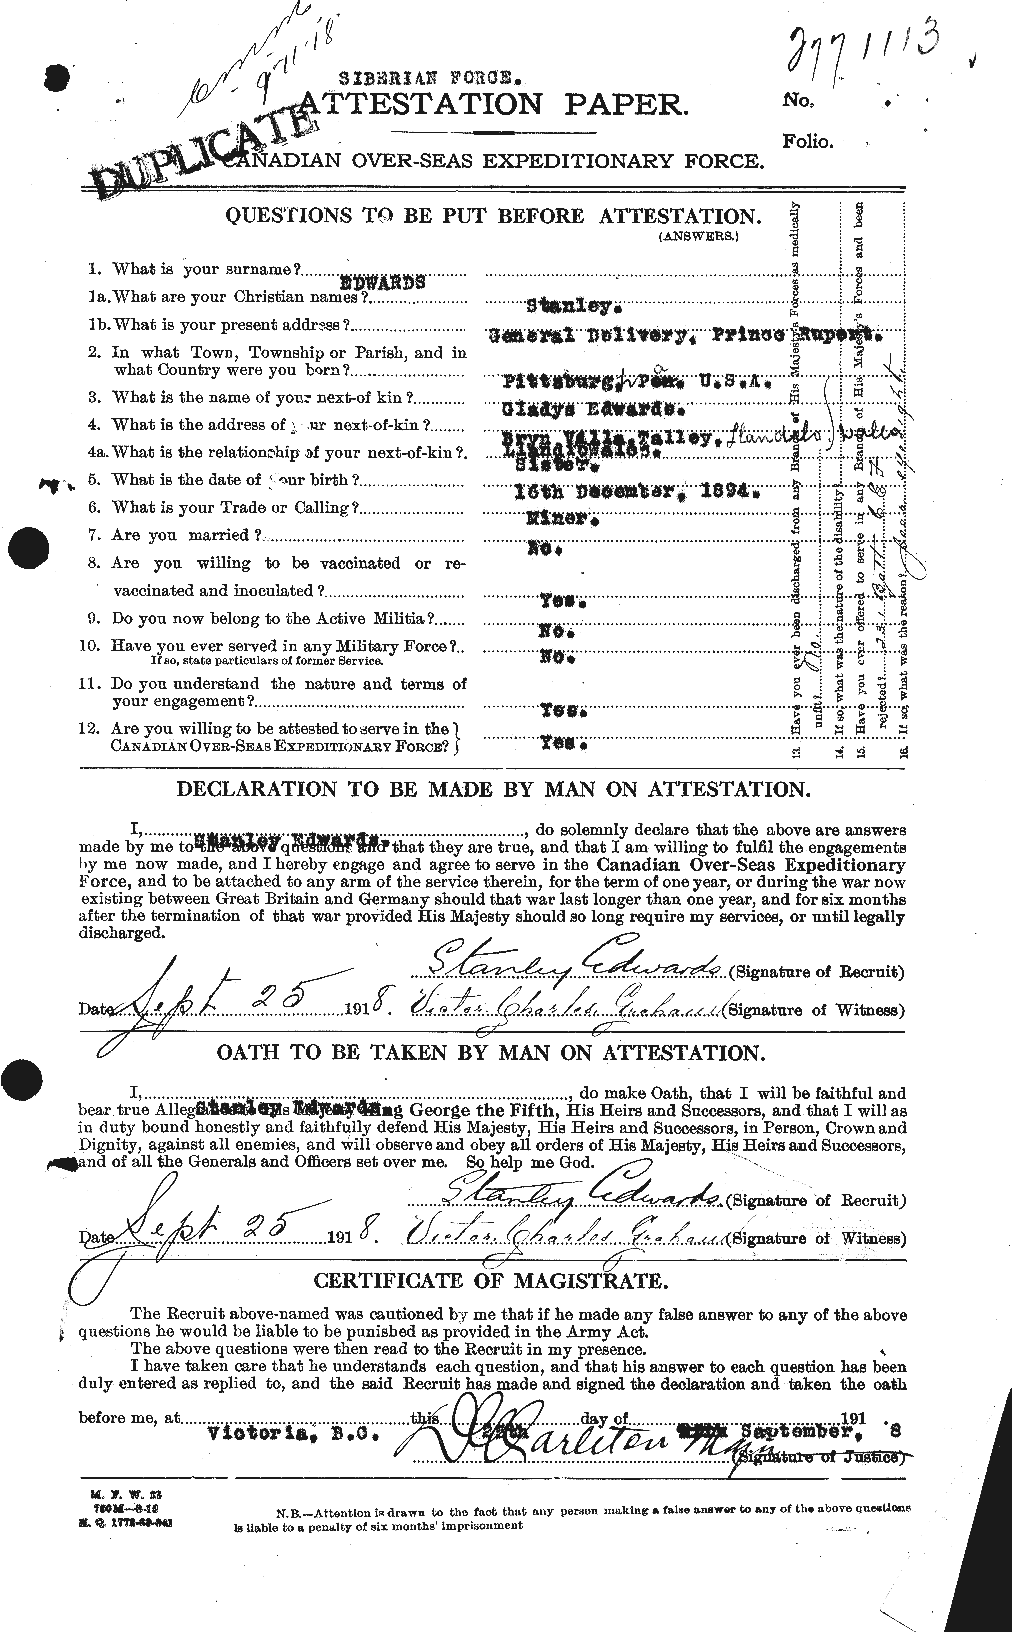 Personnel Records of the First World War - CEF 310315a